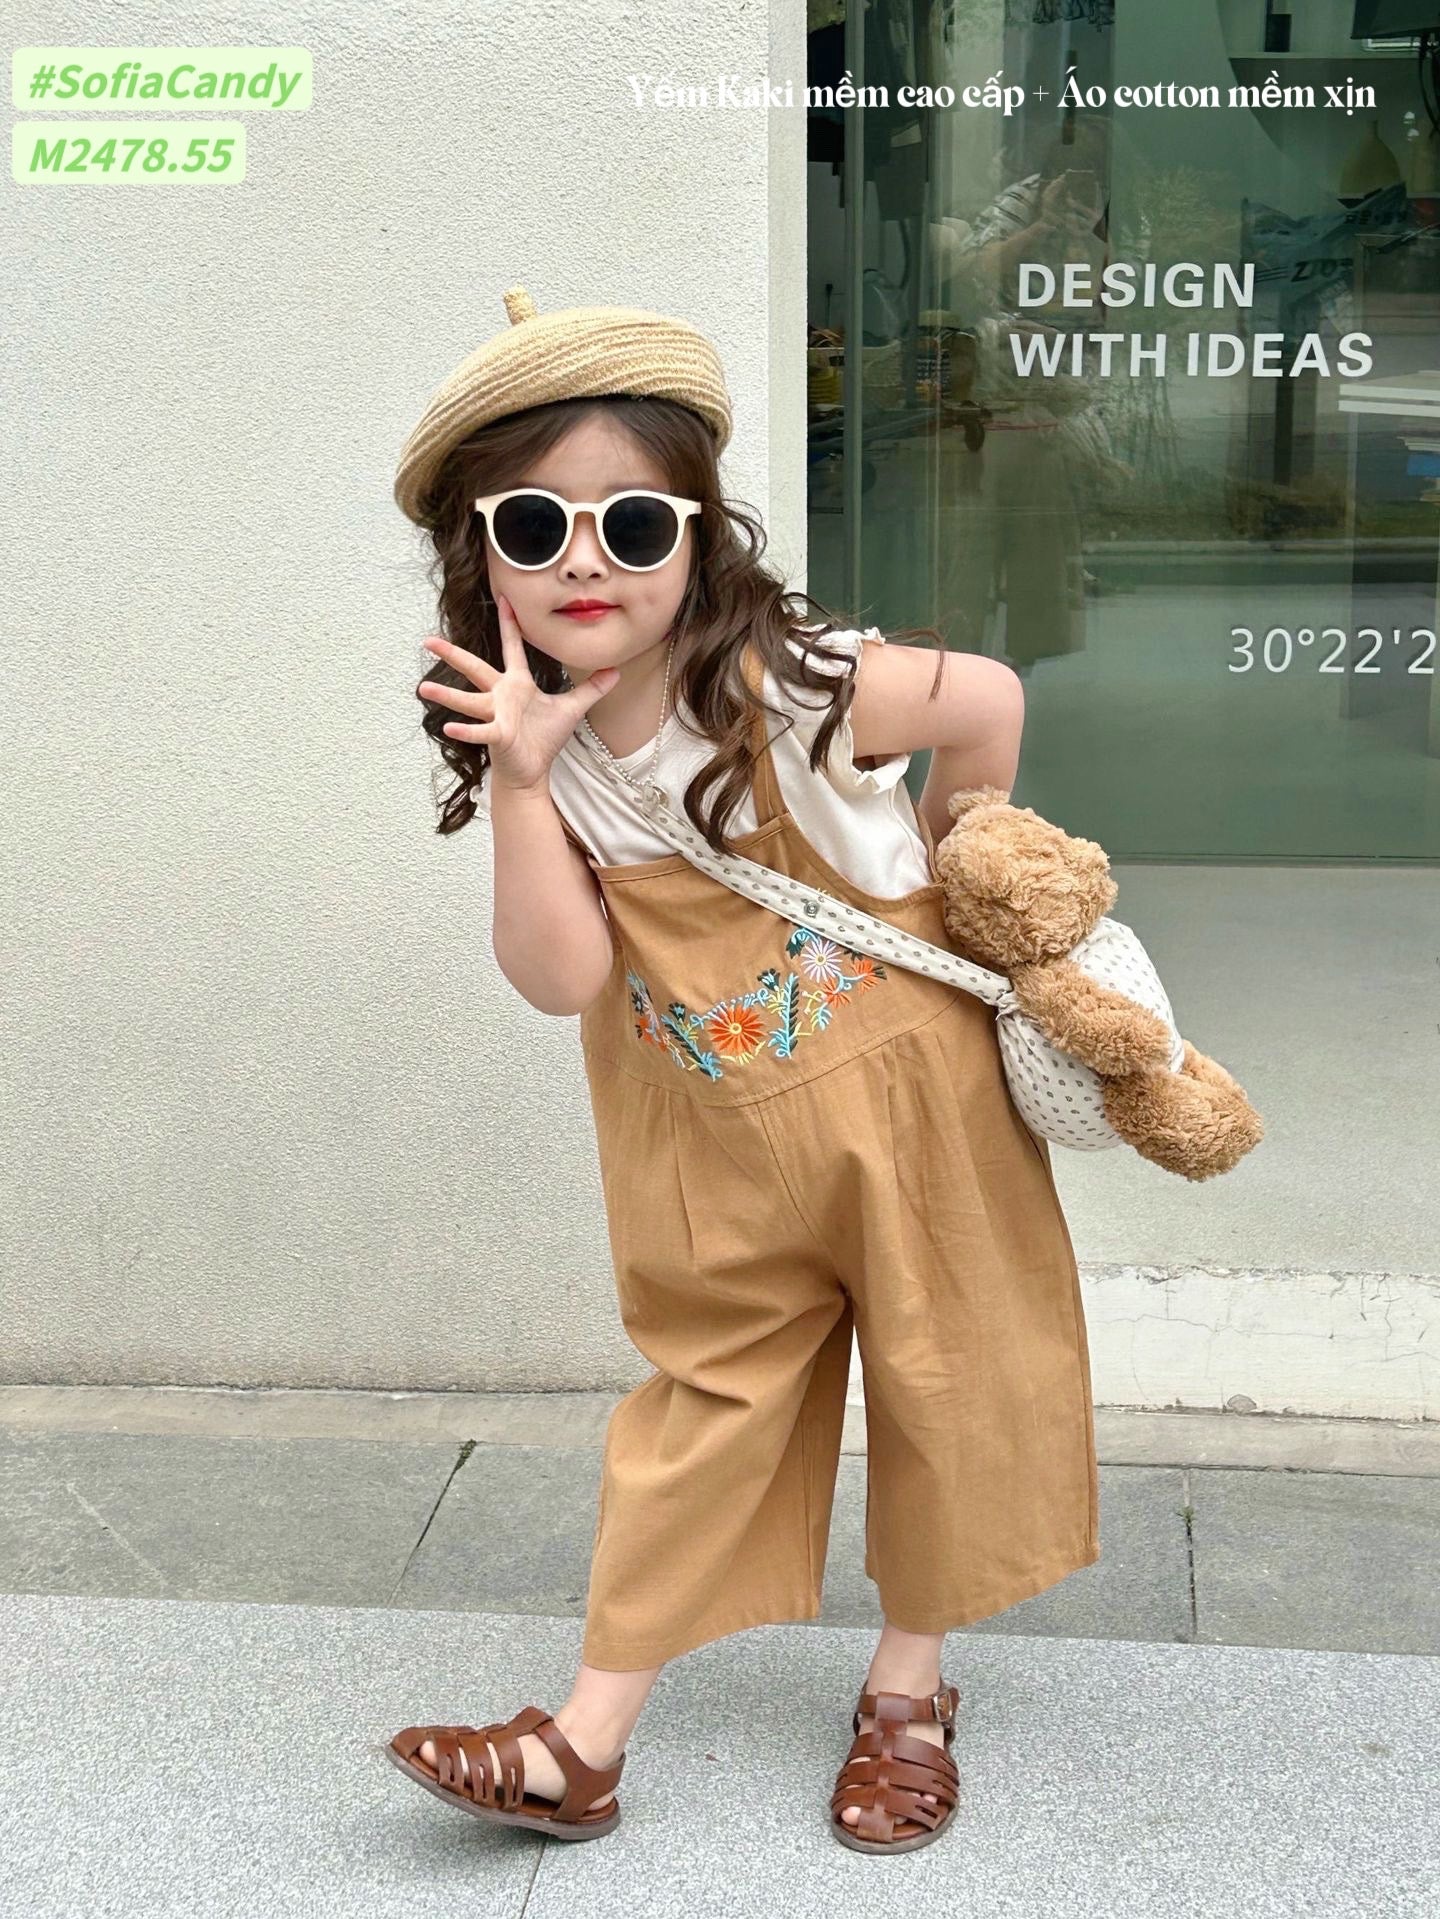 WHITE TOP AND LIGHT BROWN OVERALL SET